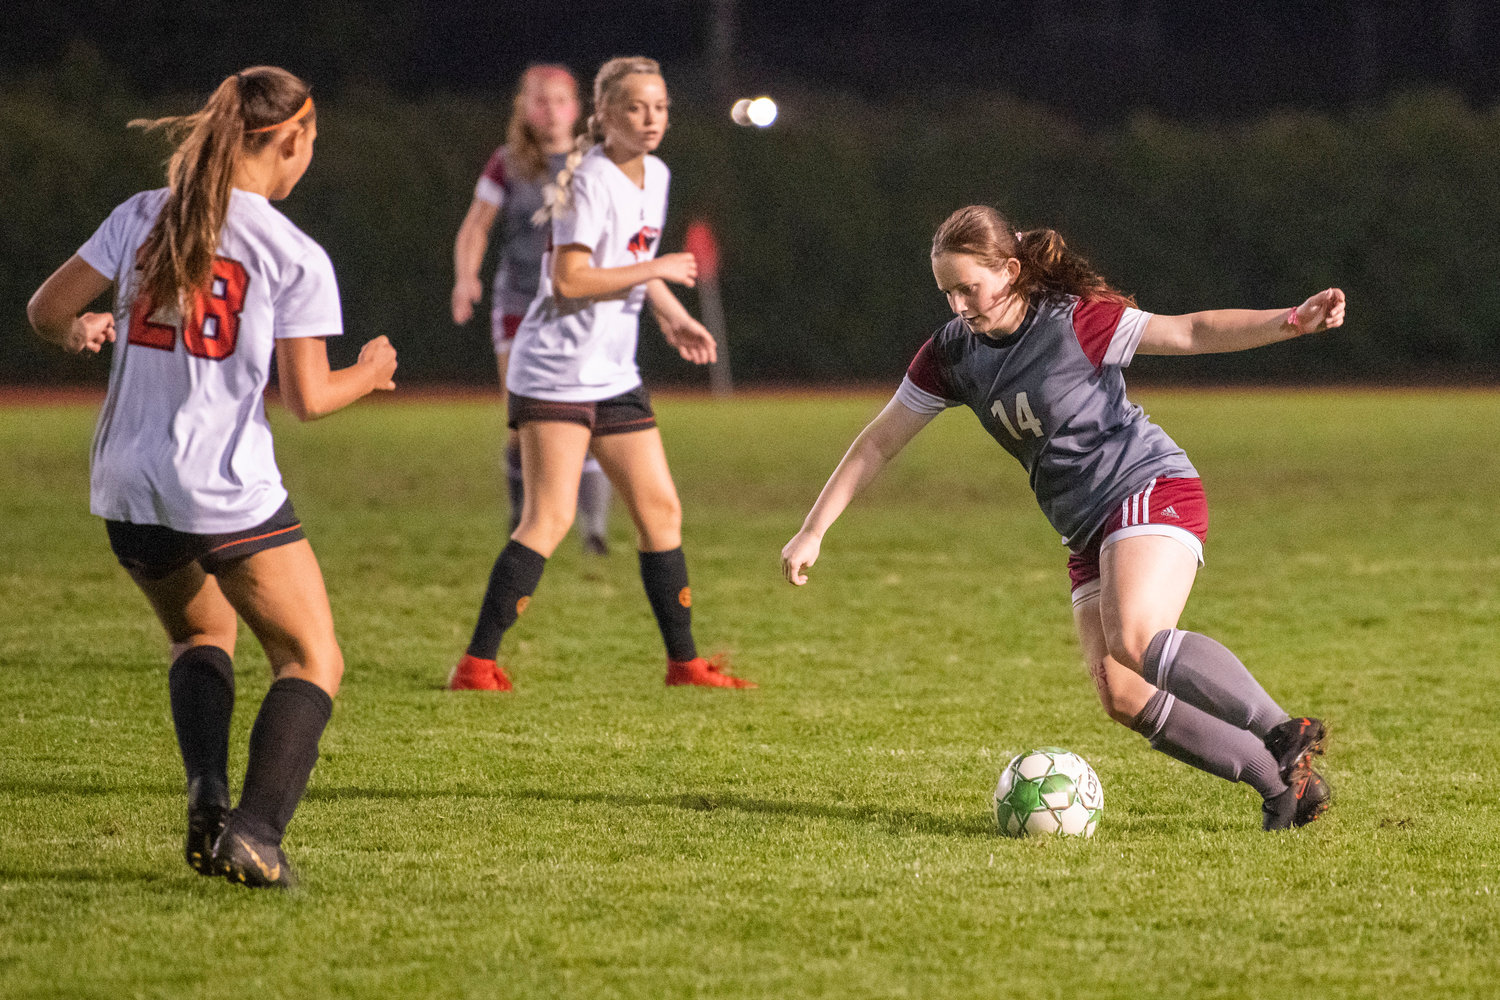 W.F. West's Maddie Shields runs with the ball during the Bearcats' 2-1 win over Centralia on Oct. 18 in Chehalis.